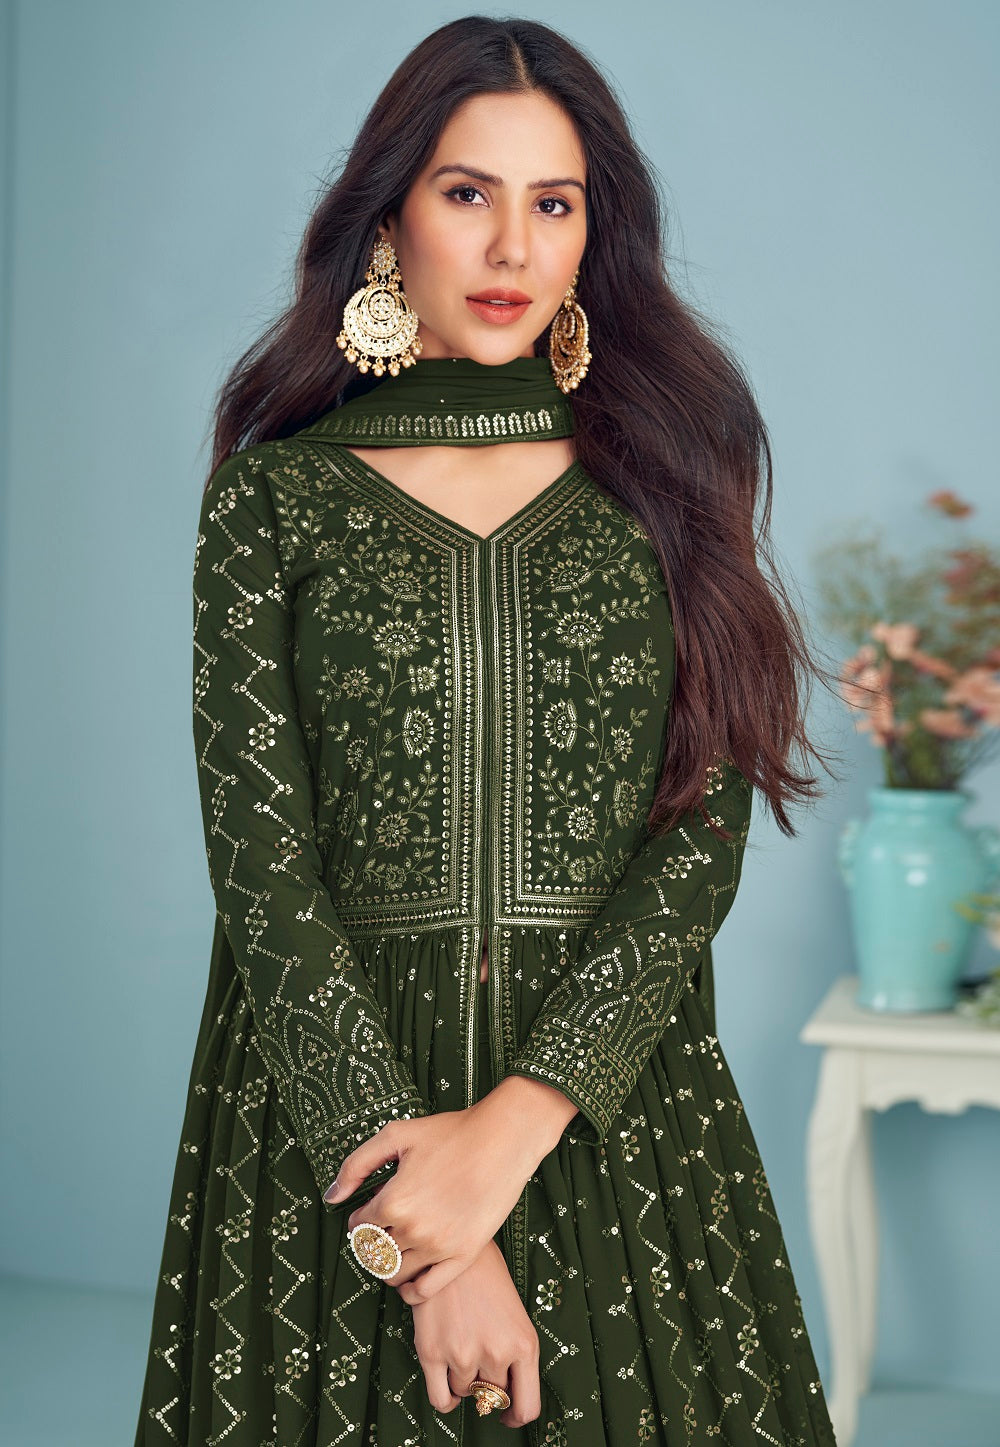 Embroidered Georgette Abaya Style Suit in Olive Green